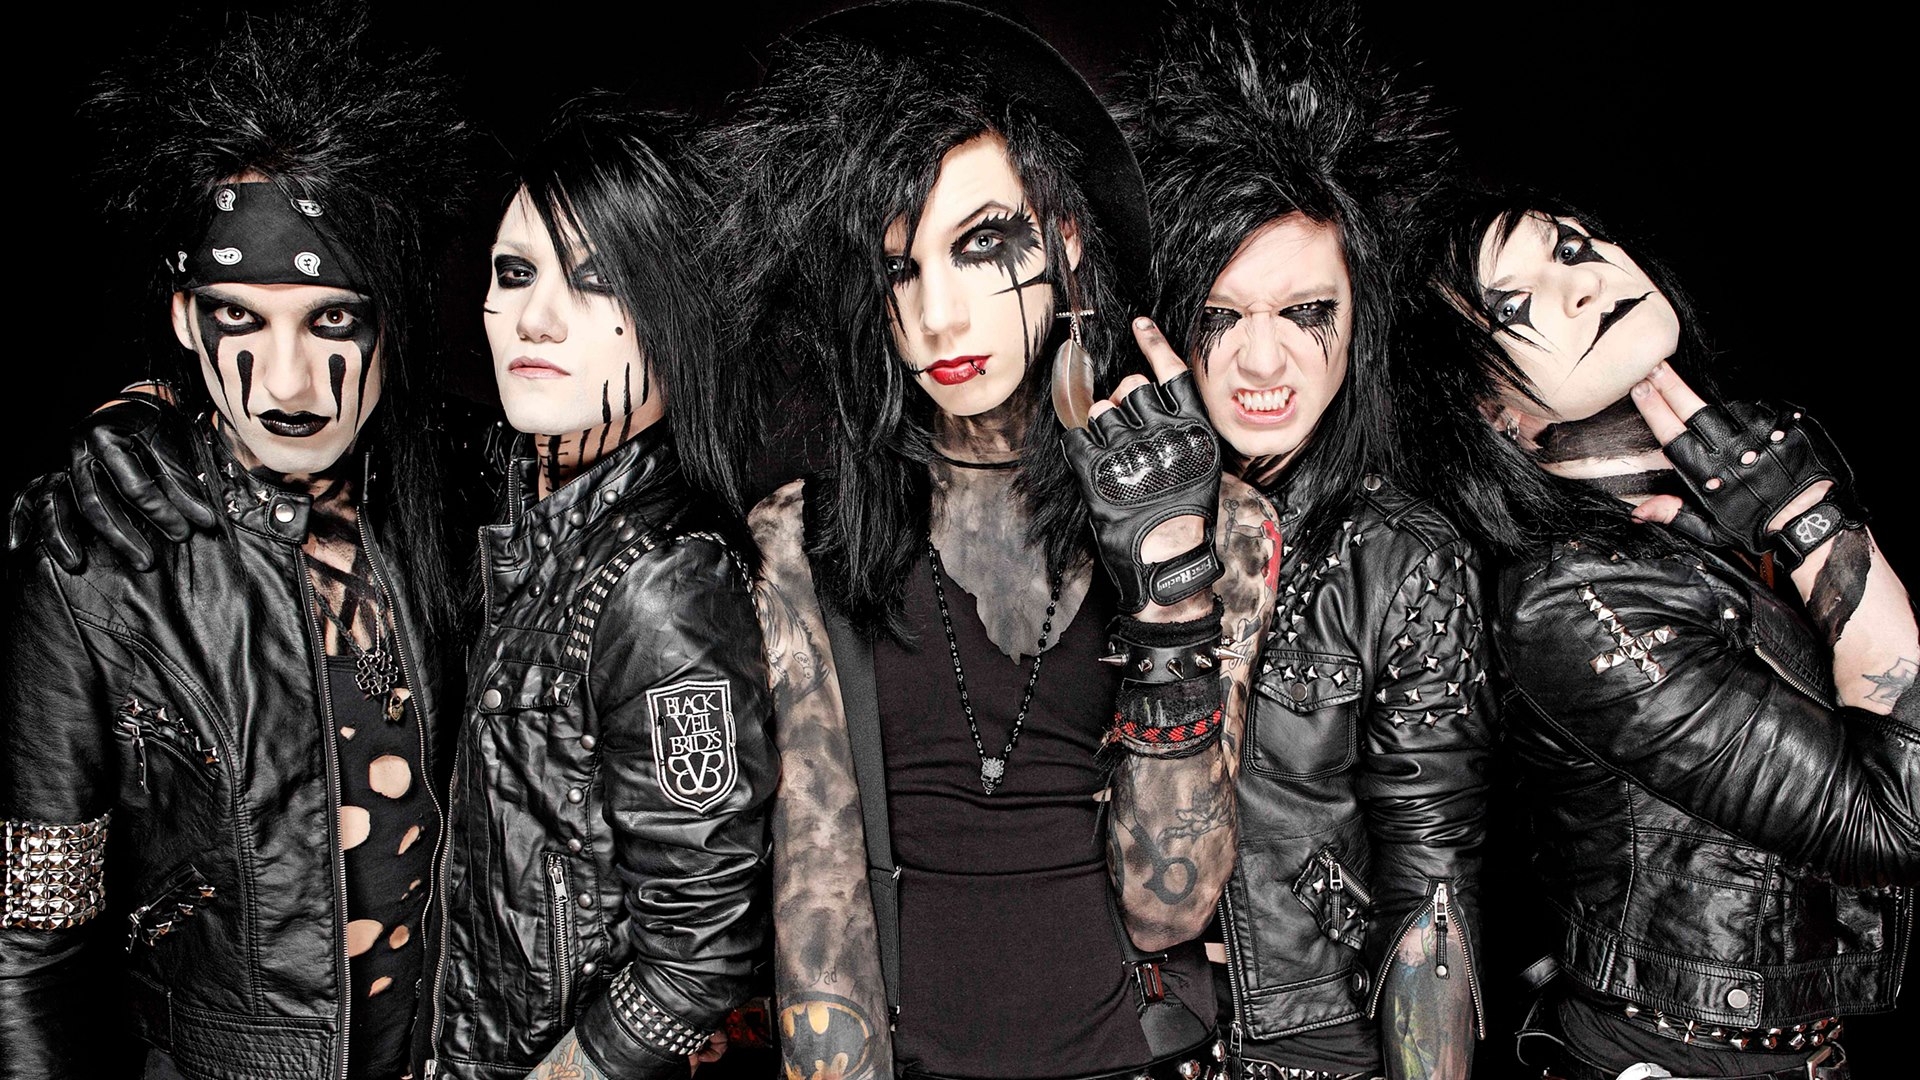 Wallpaper, makeup, band, costumes, midnight, Black Veil Brides, girl, material, image, goth subculture, product, social group, punk fashion 1920x1080